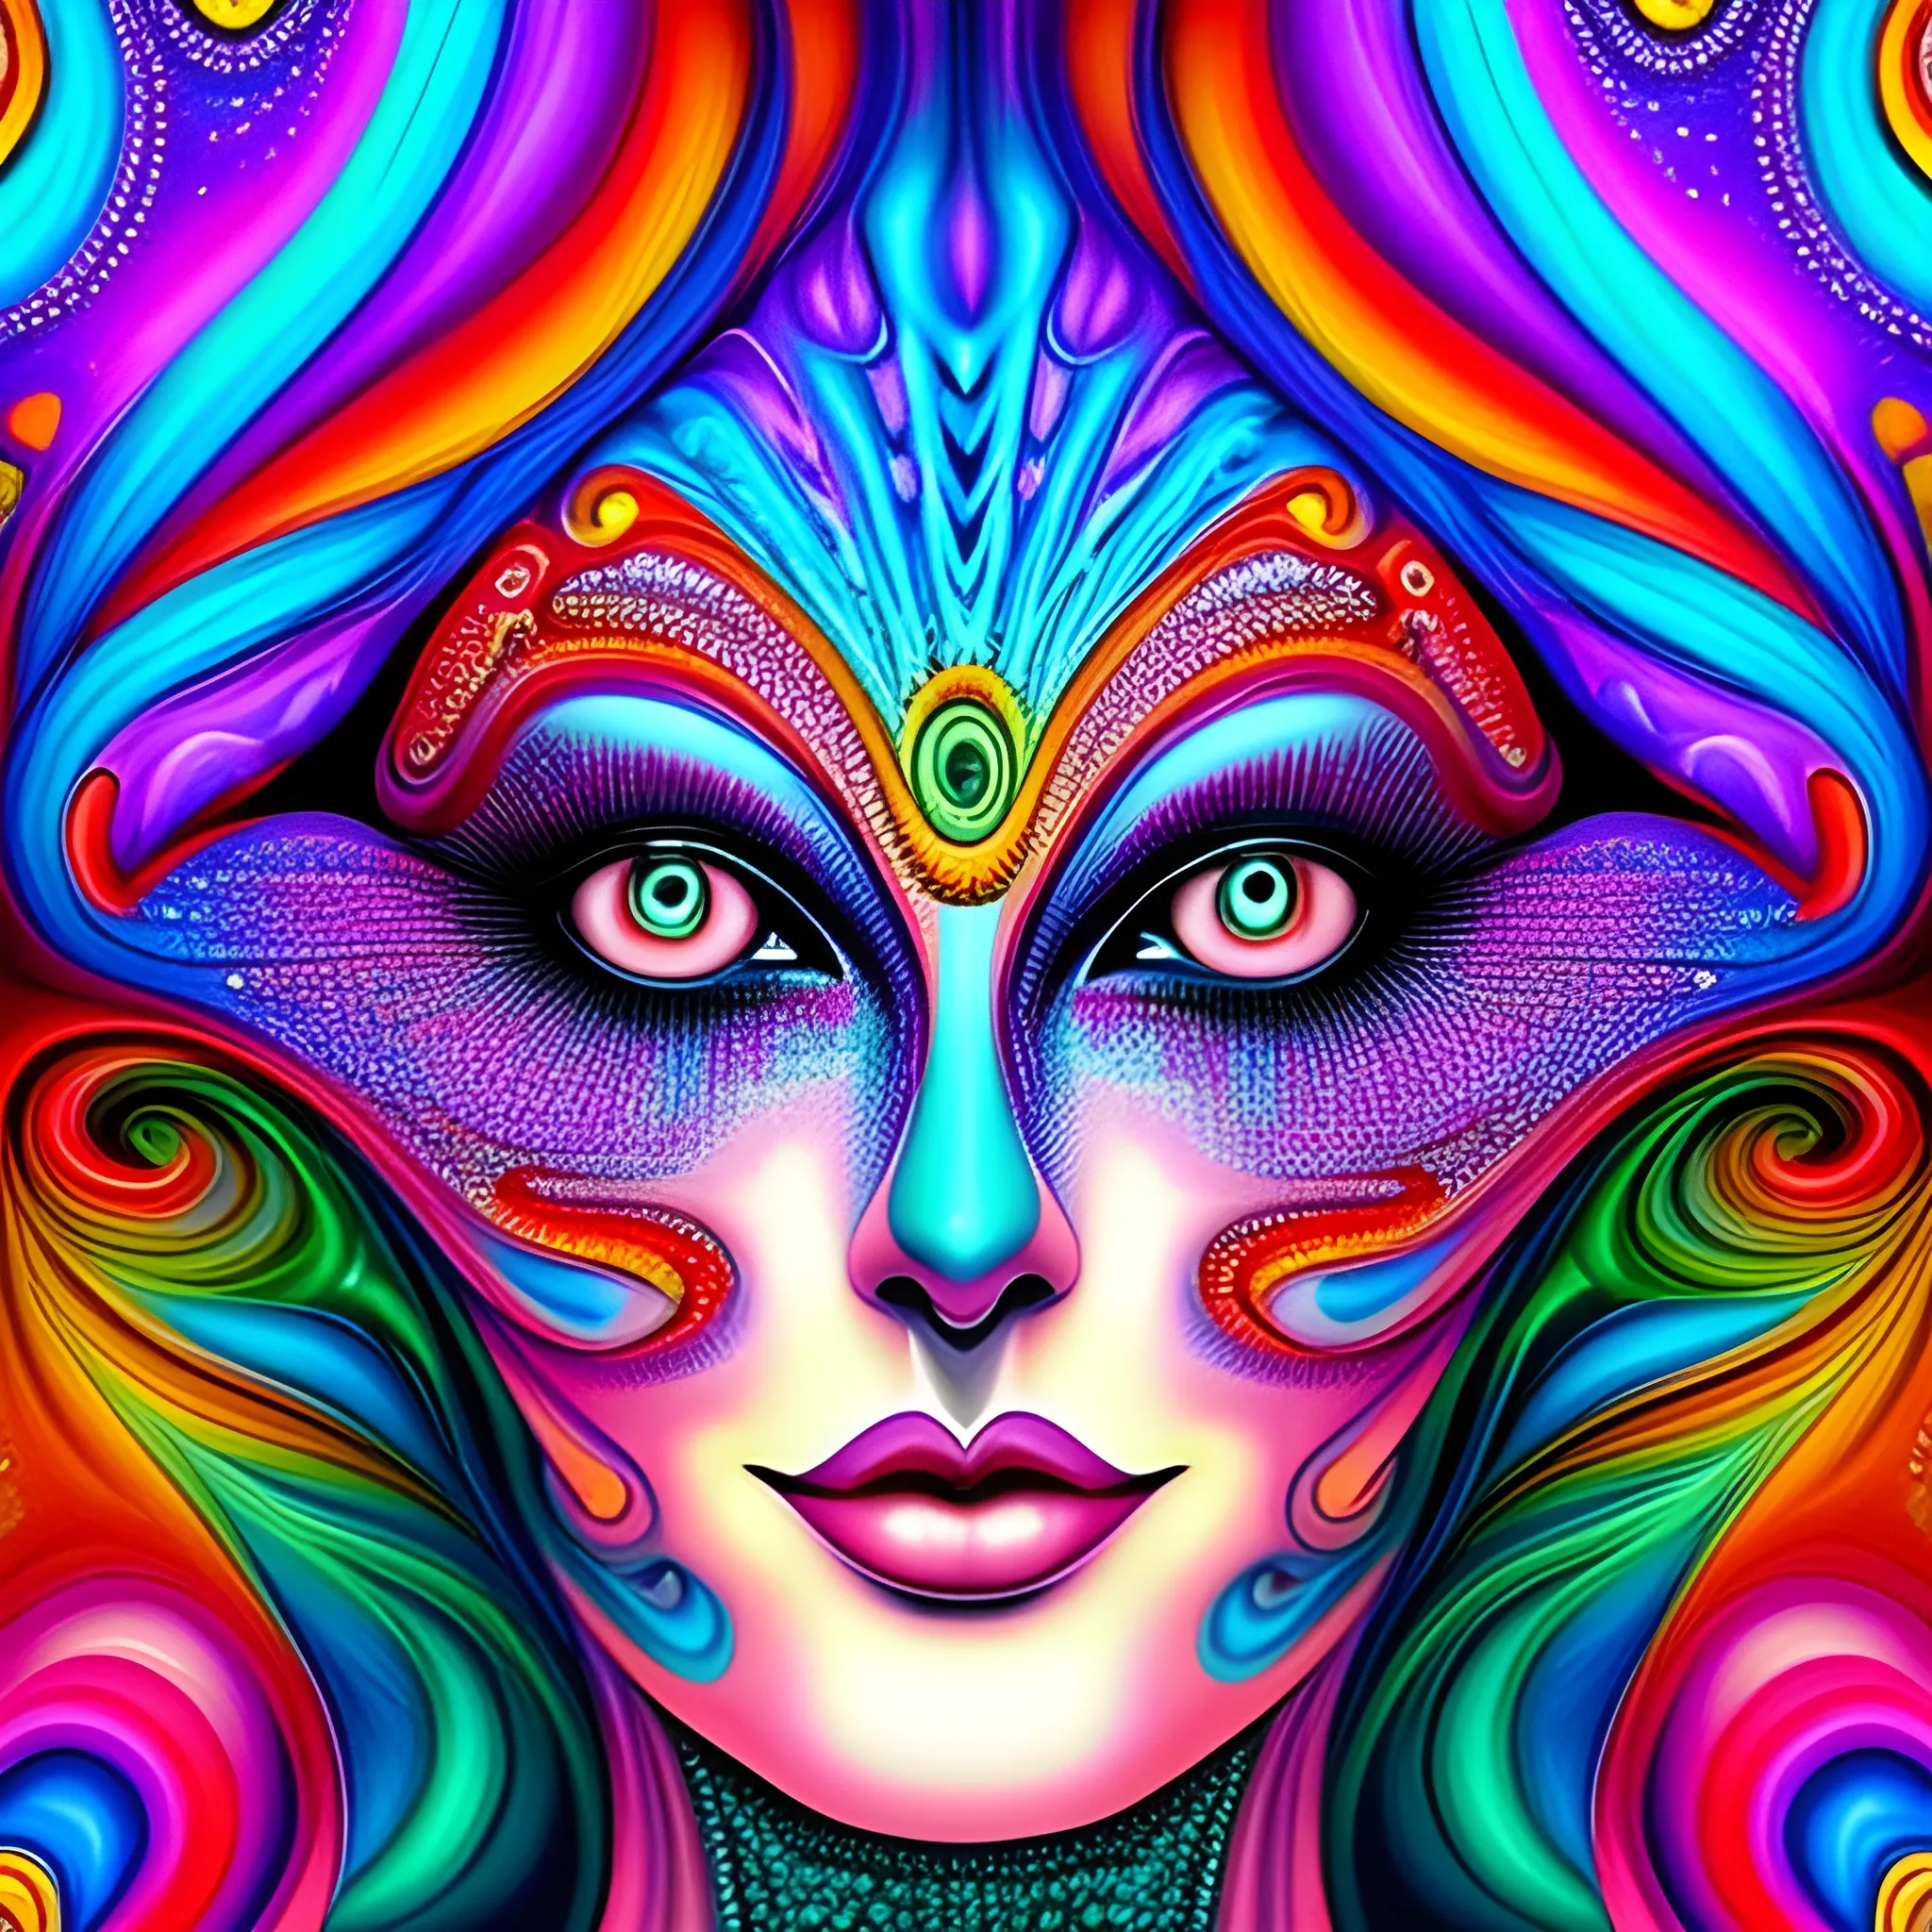 Enigmatic Dream based on colorful fractals. the face of a beautiful girl is visible in the background., Trippy